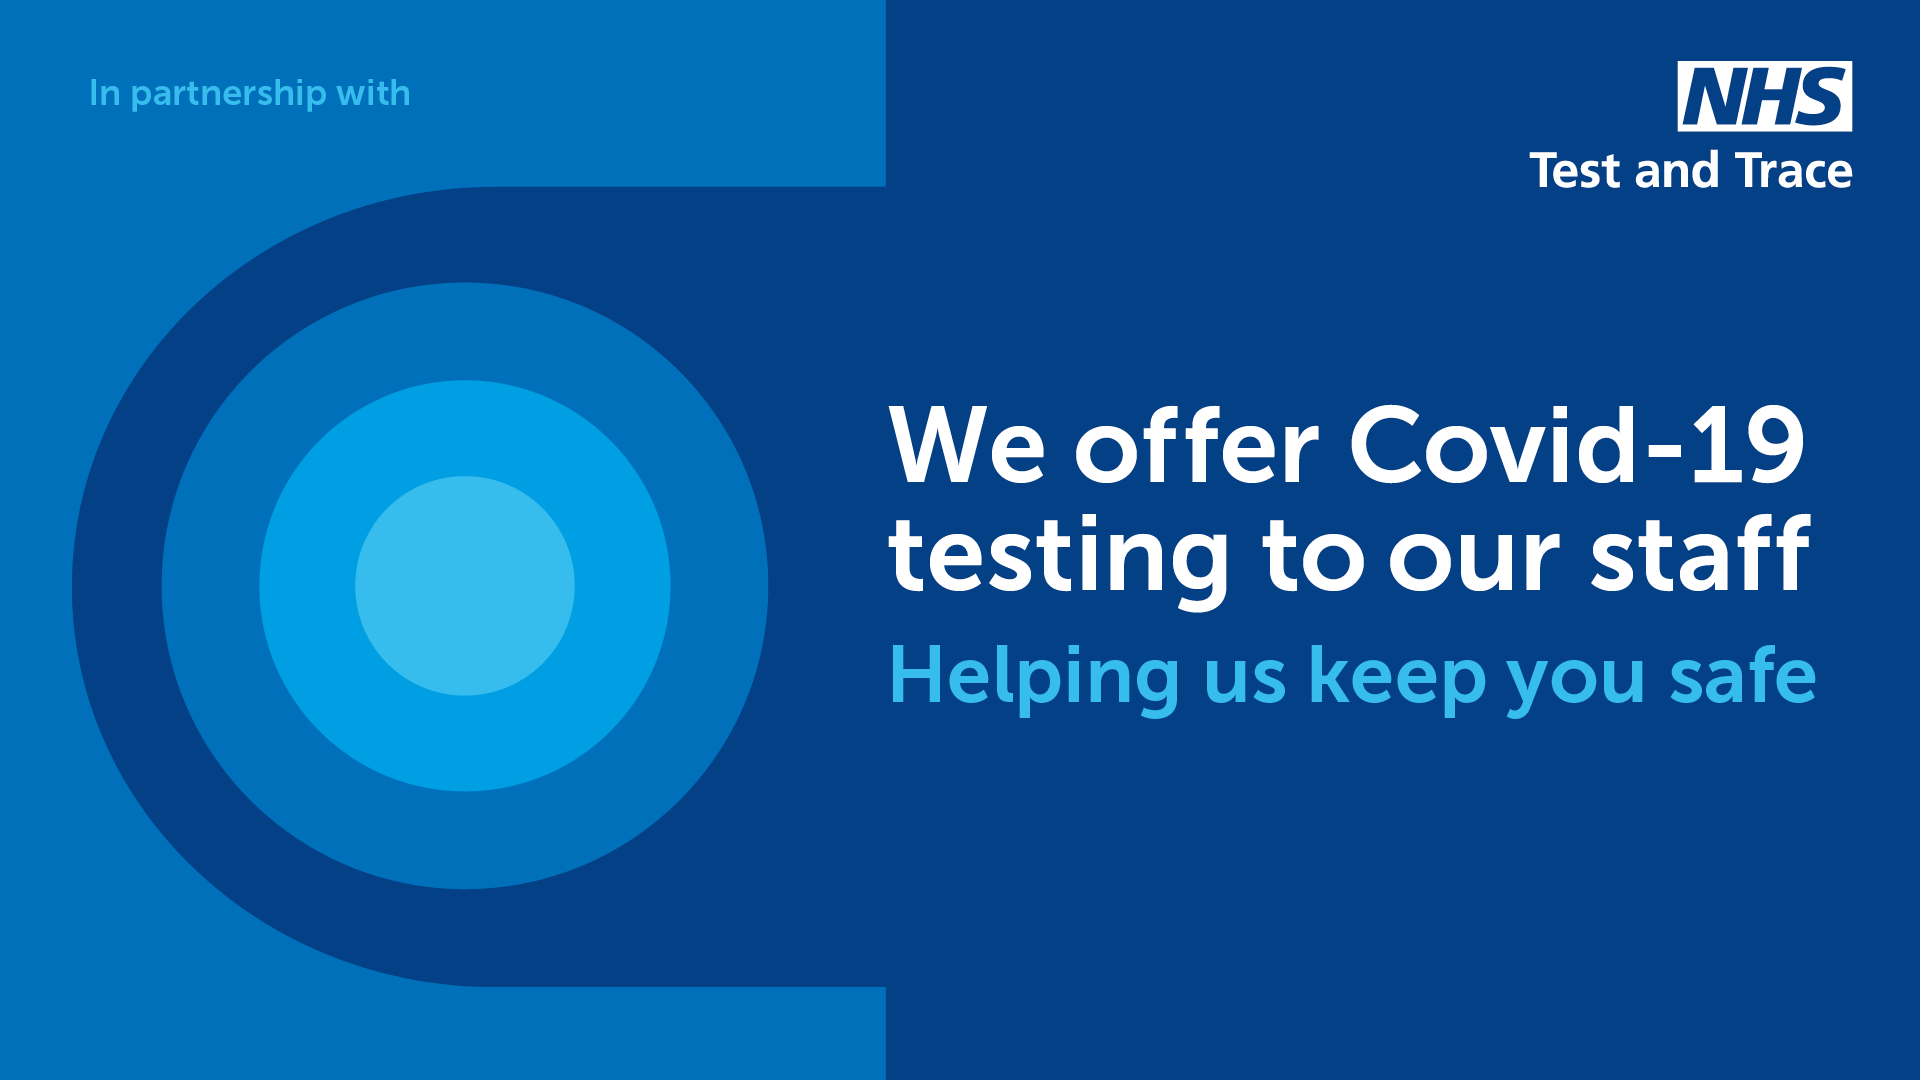 Blue image with text in partner ship with NHS test and trace We offer covid-19 testing to our staff helping us keep you safe